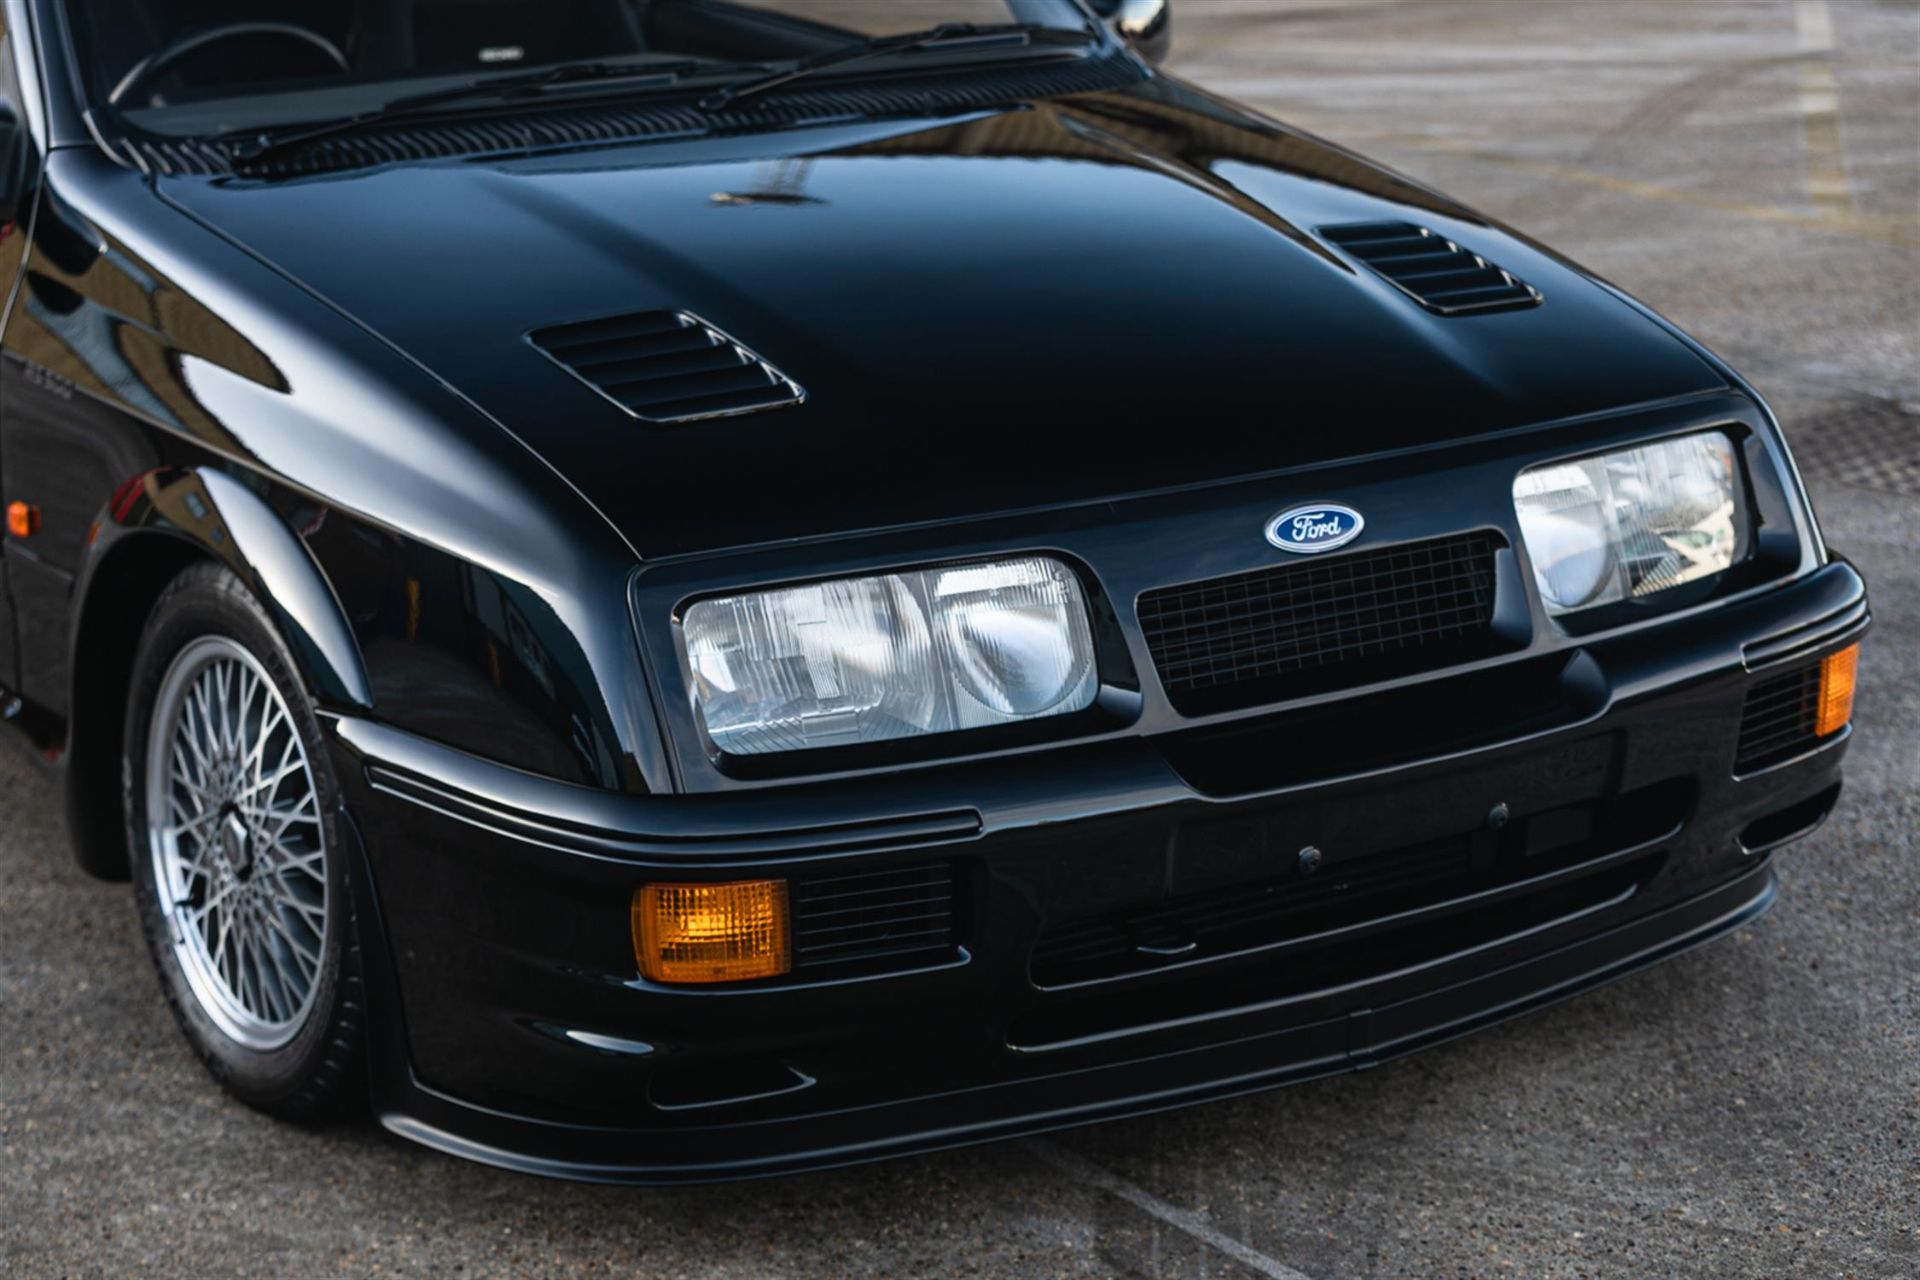 1987 Ford Sierra Cosworth RS500 - Image 6 of 10